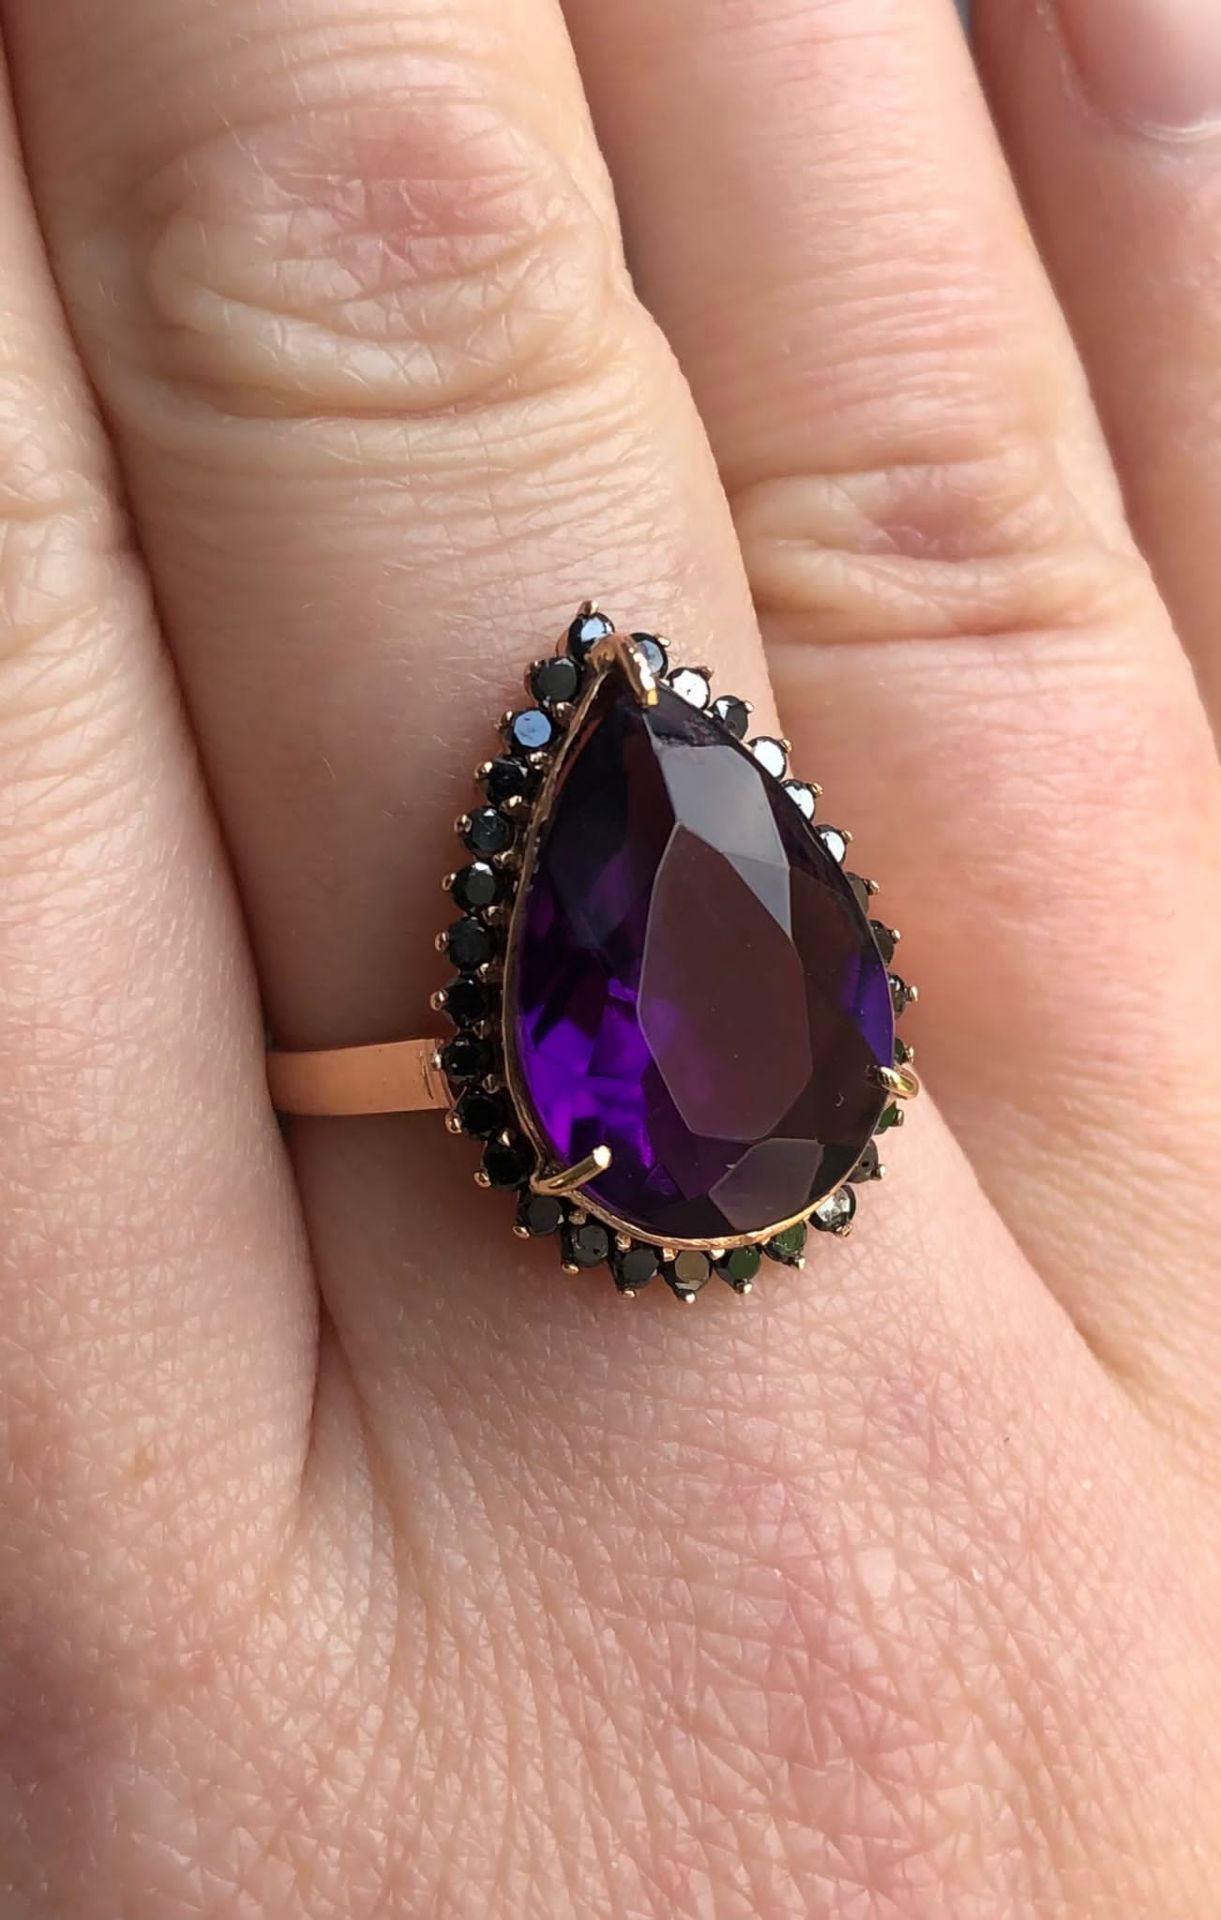 Beautiful Natural Amethyst 4.38ct With Natural Black Diamond & 18k White Gold - Image 4 of 8